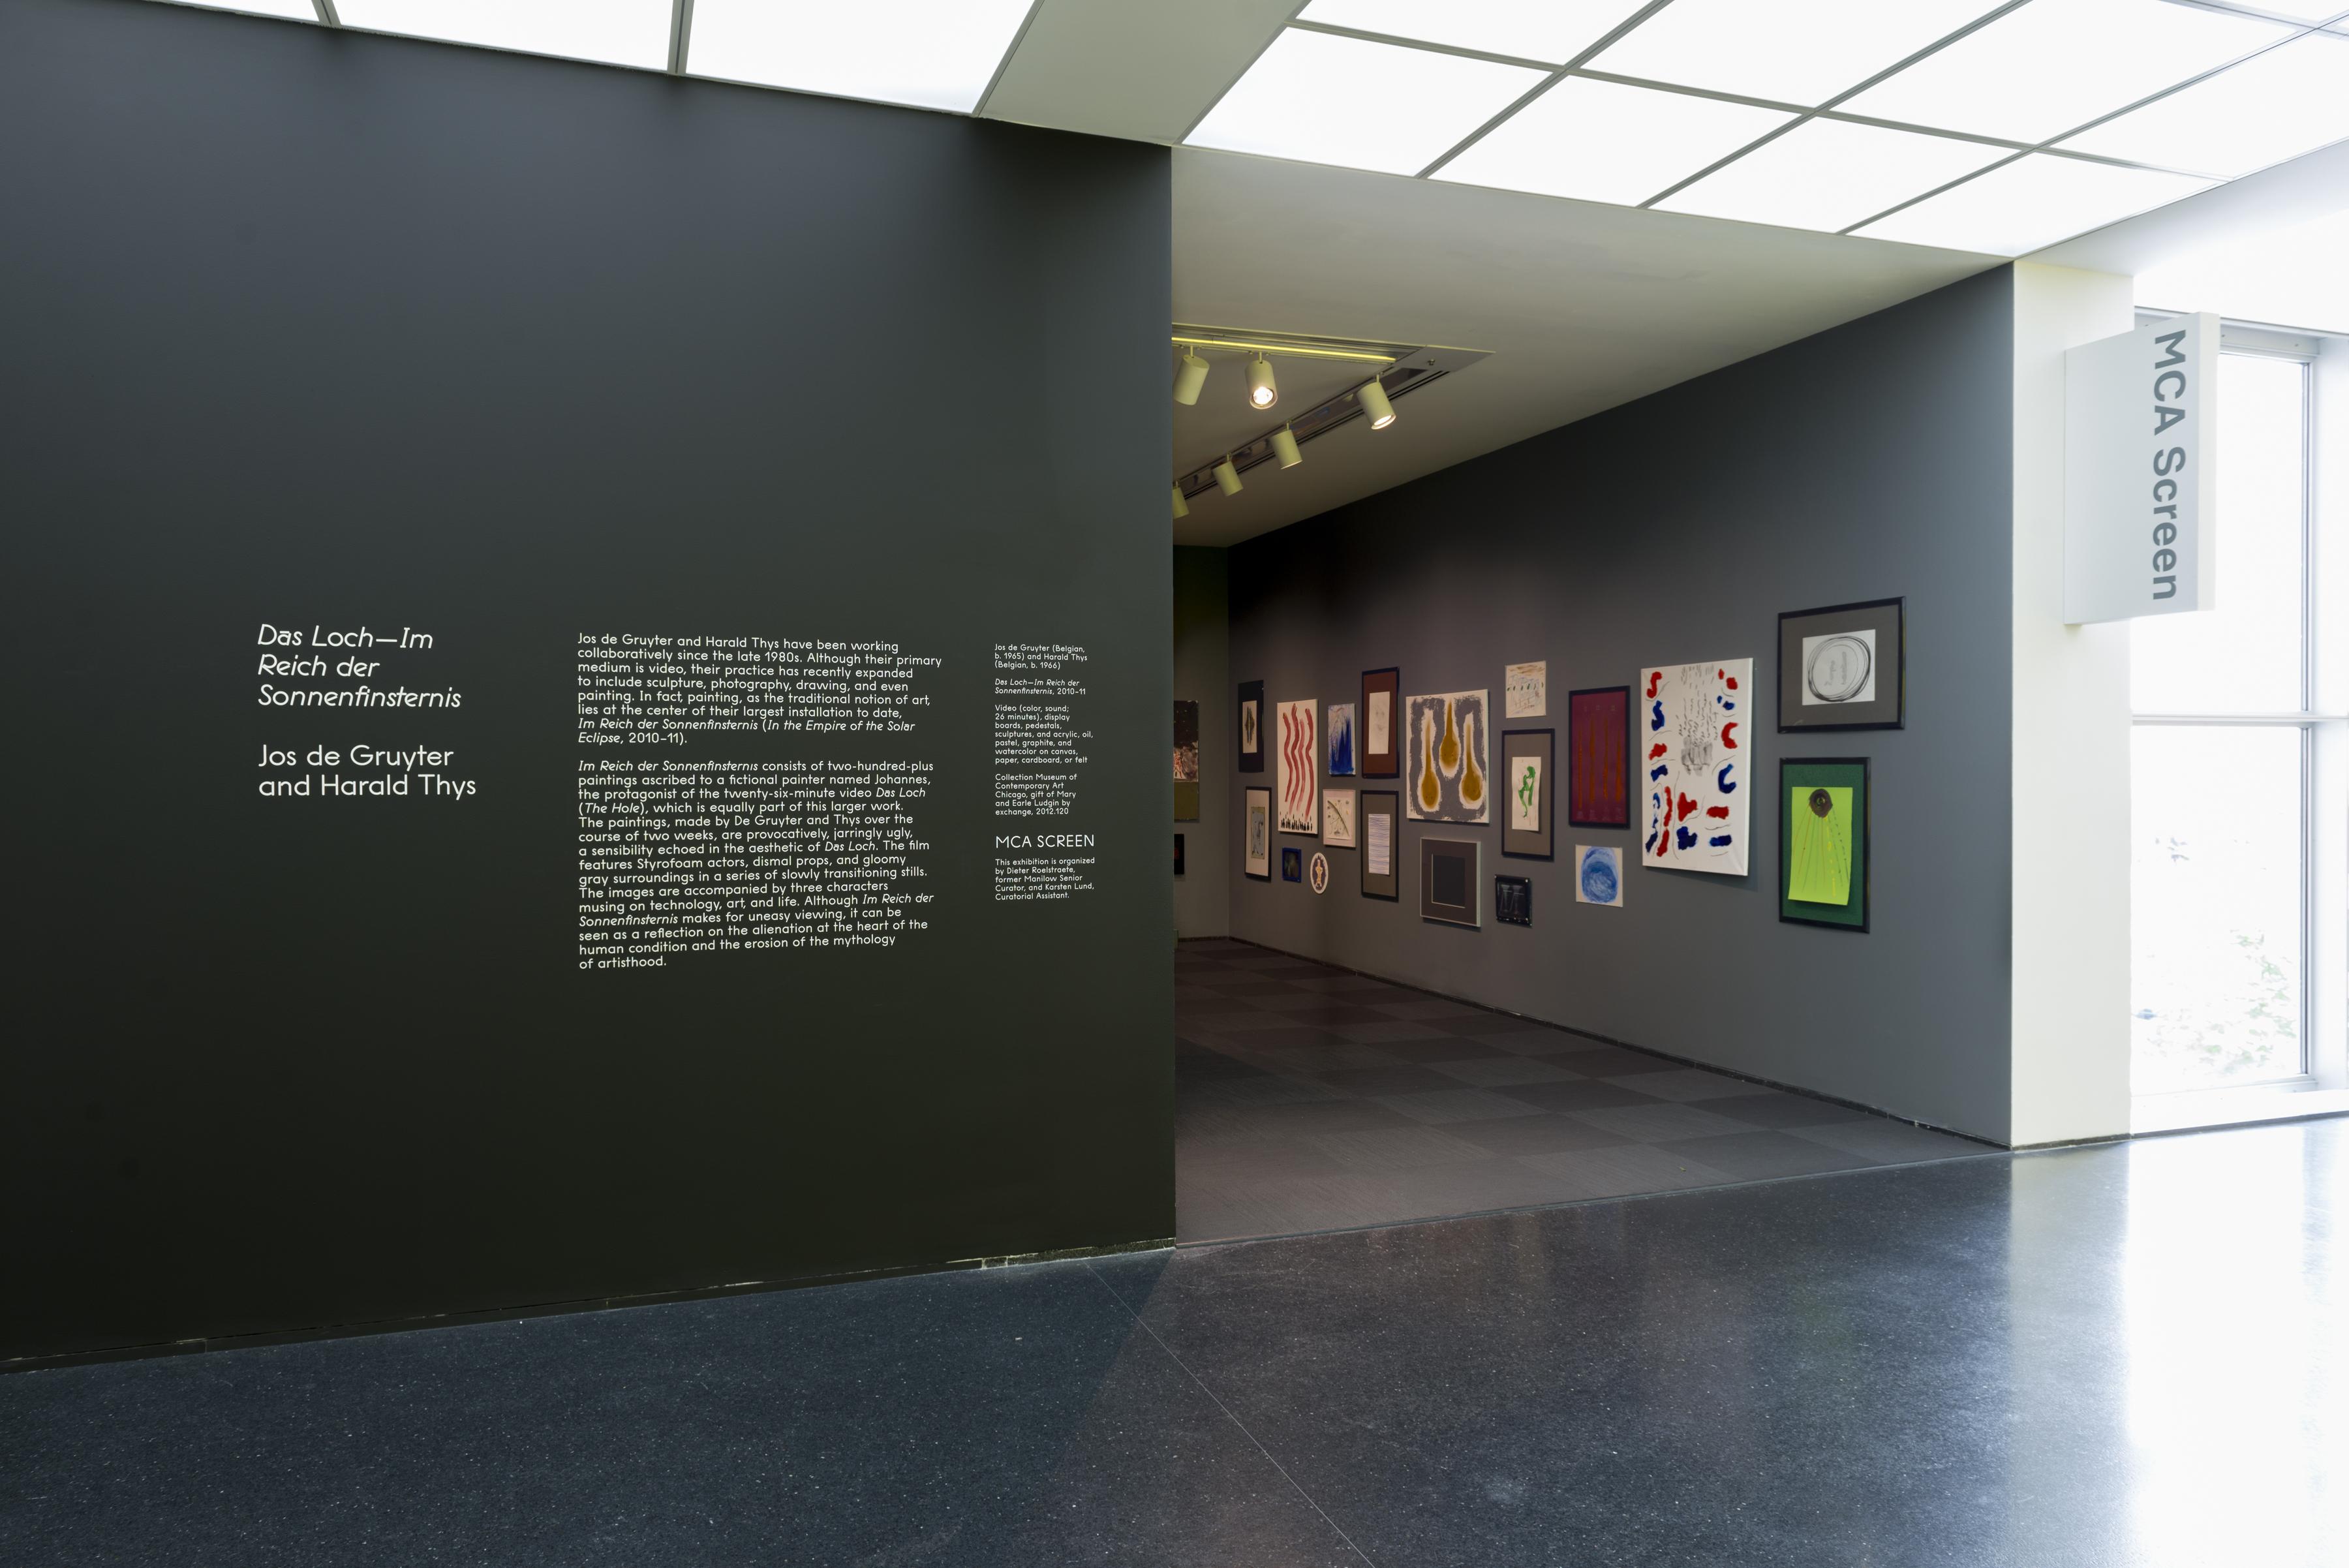 The entrance to an MCA Screen exhibition hosts white gallery text and colorful paintings hung in clusters on the opposite wall.